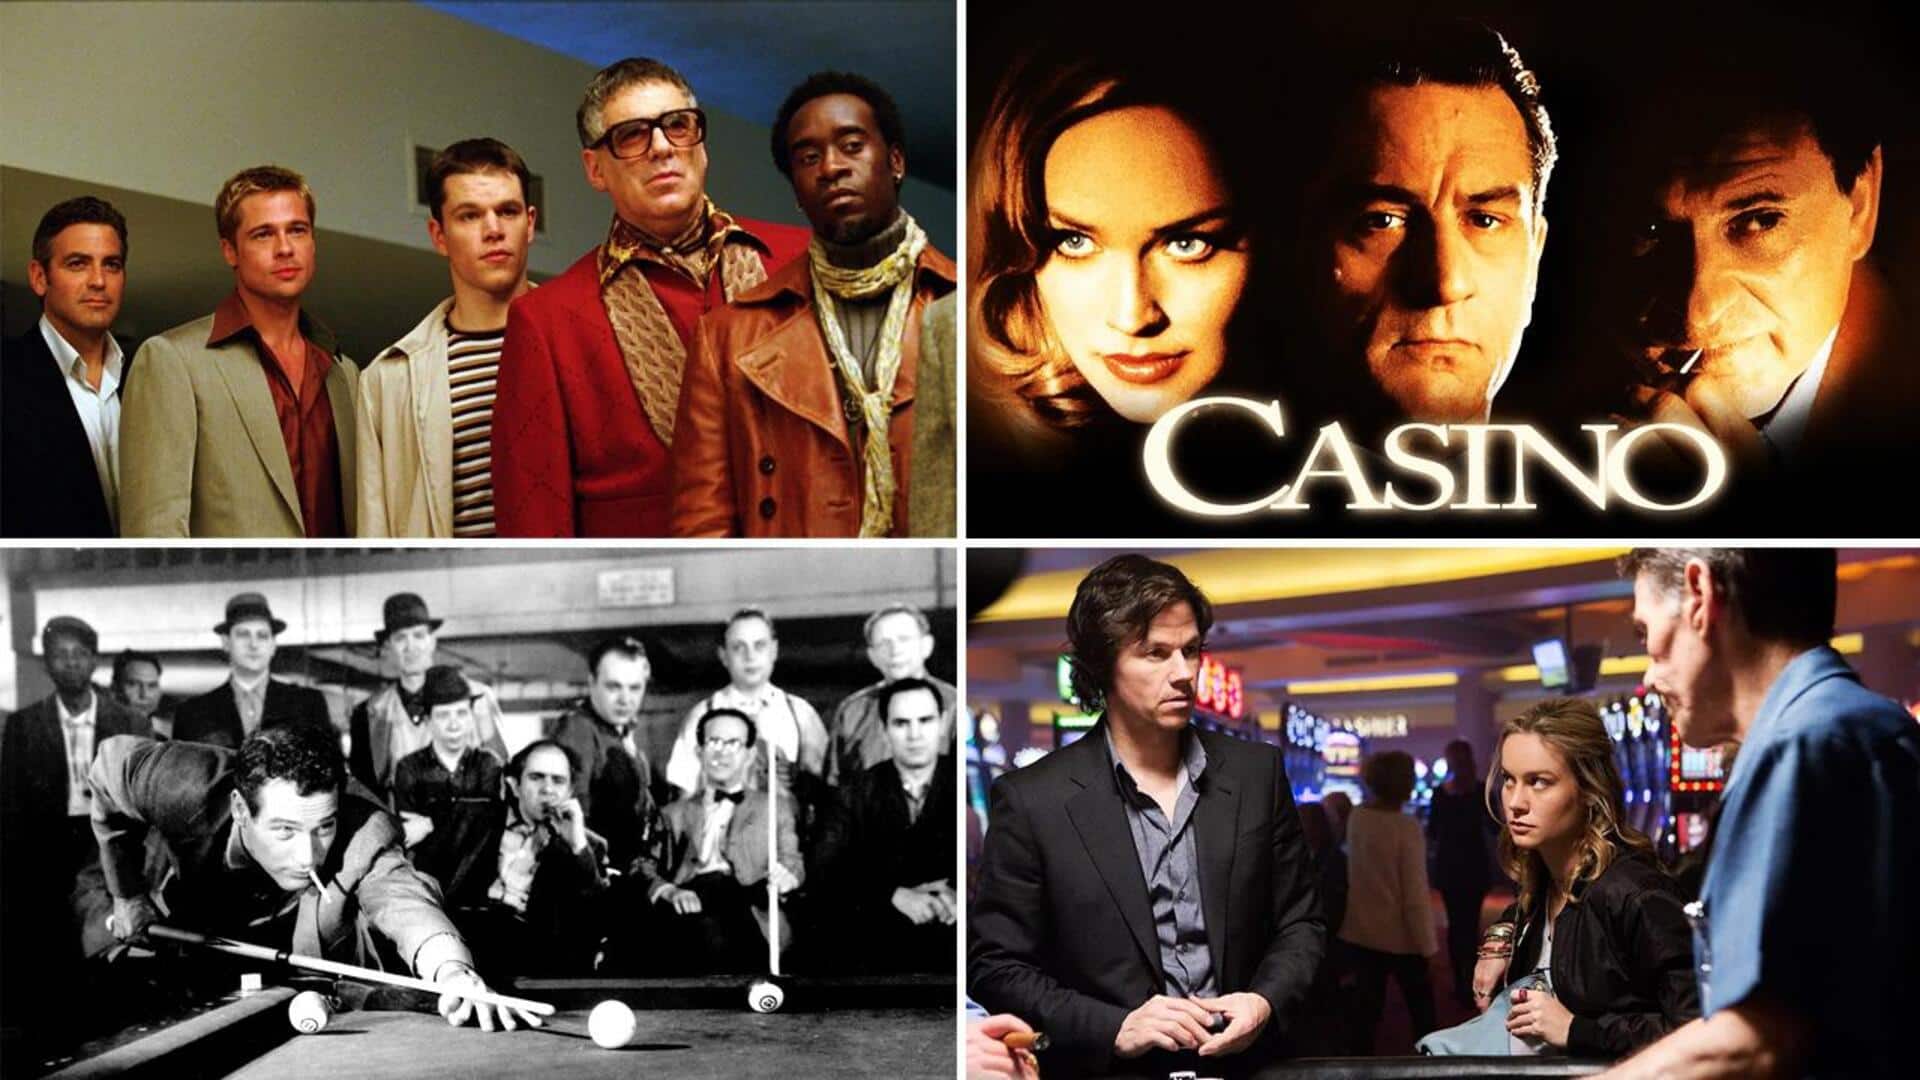 'Casino' to 'The Gambler': Hollywood movies based on gambling